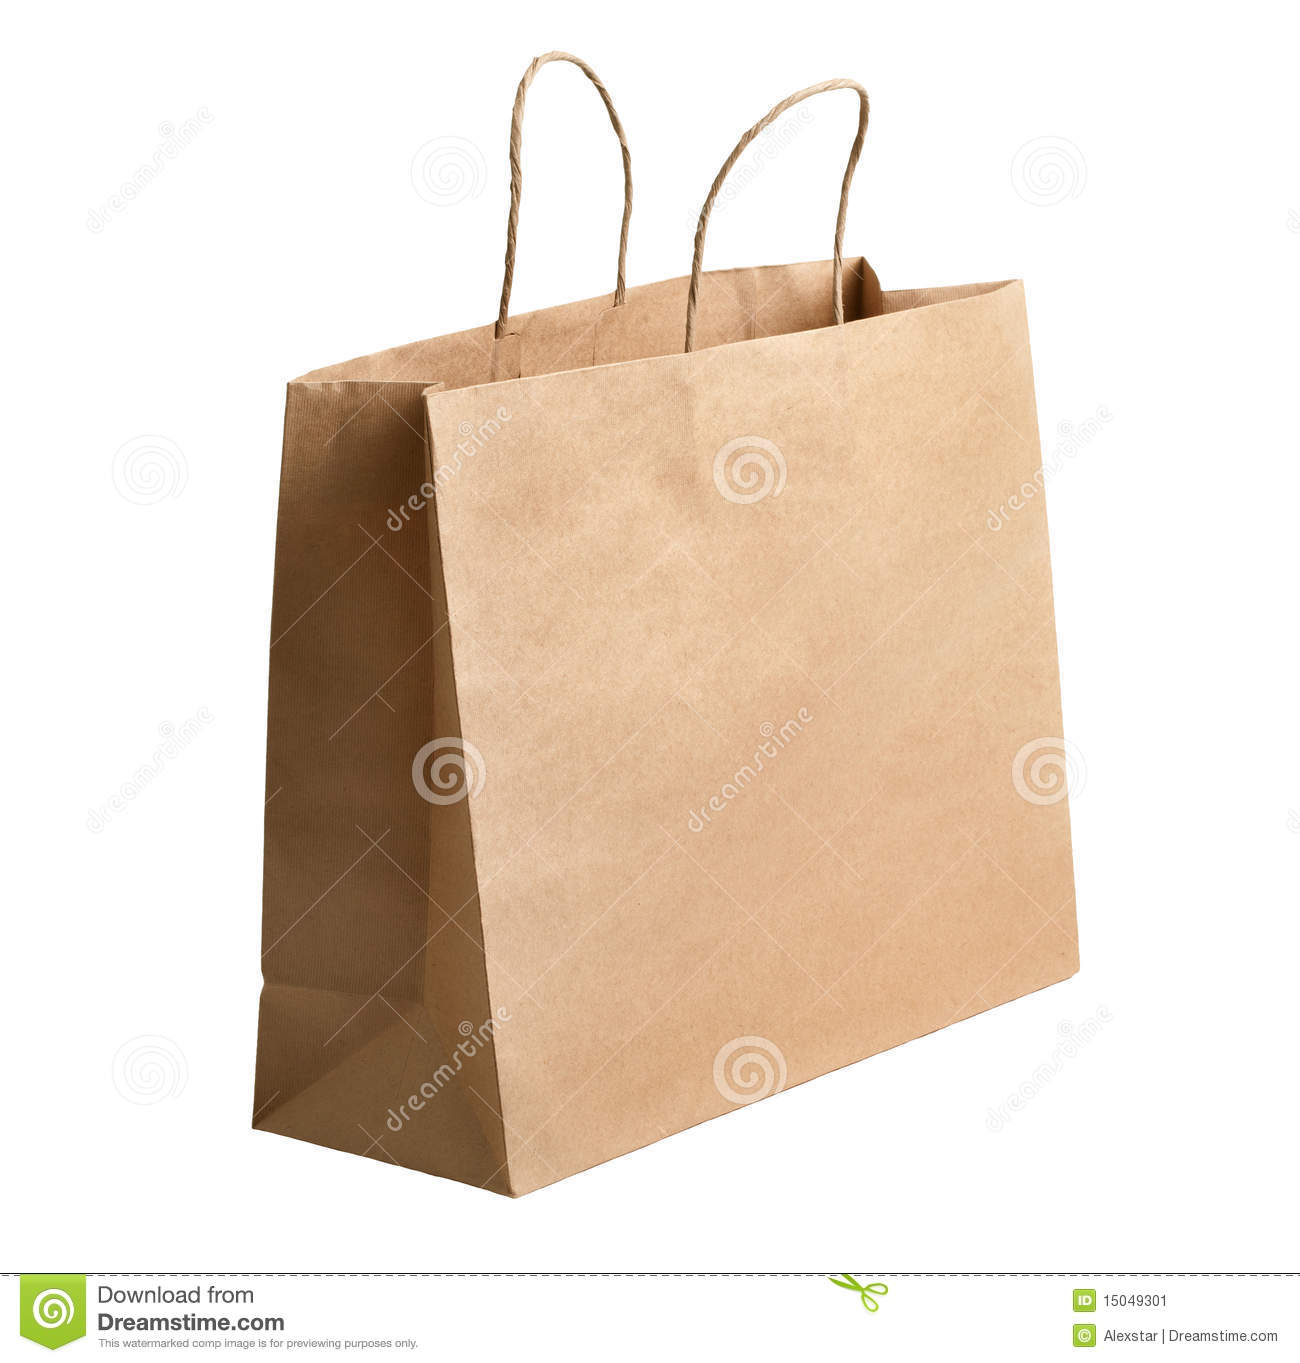 Brown Paper Carrier Bag With Handles Isolated On White Background